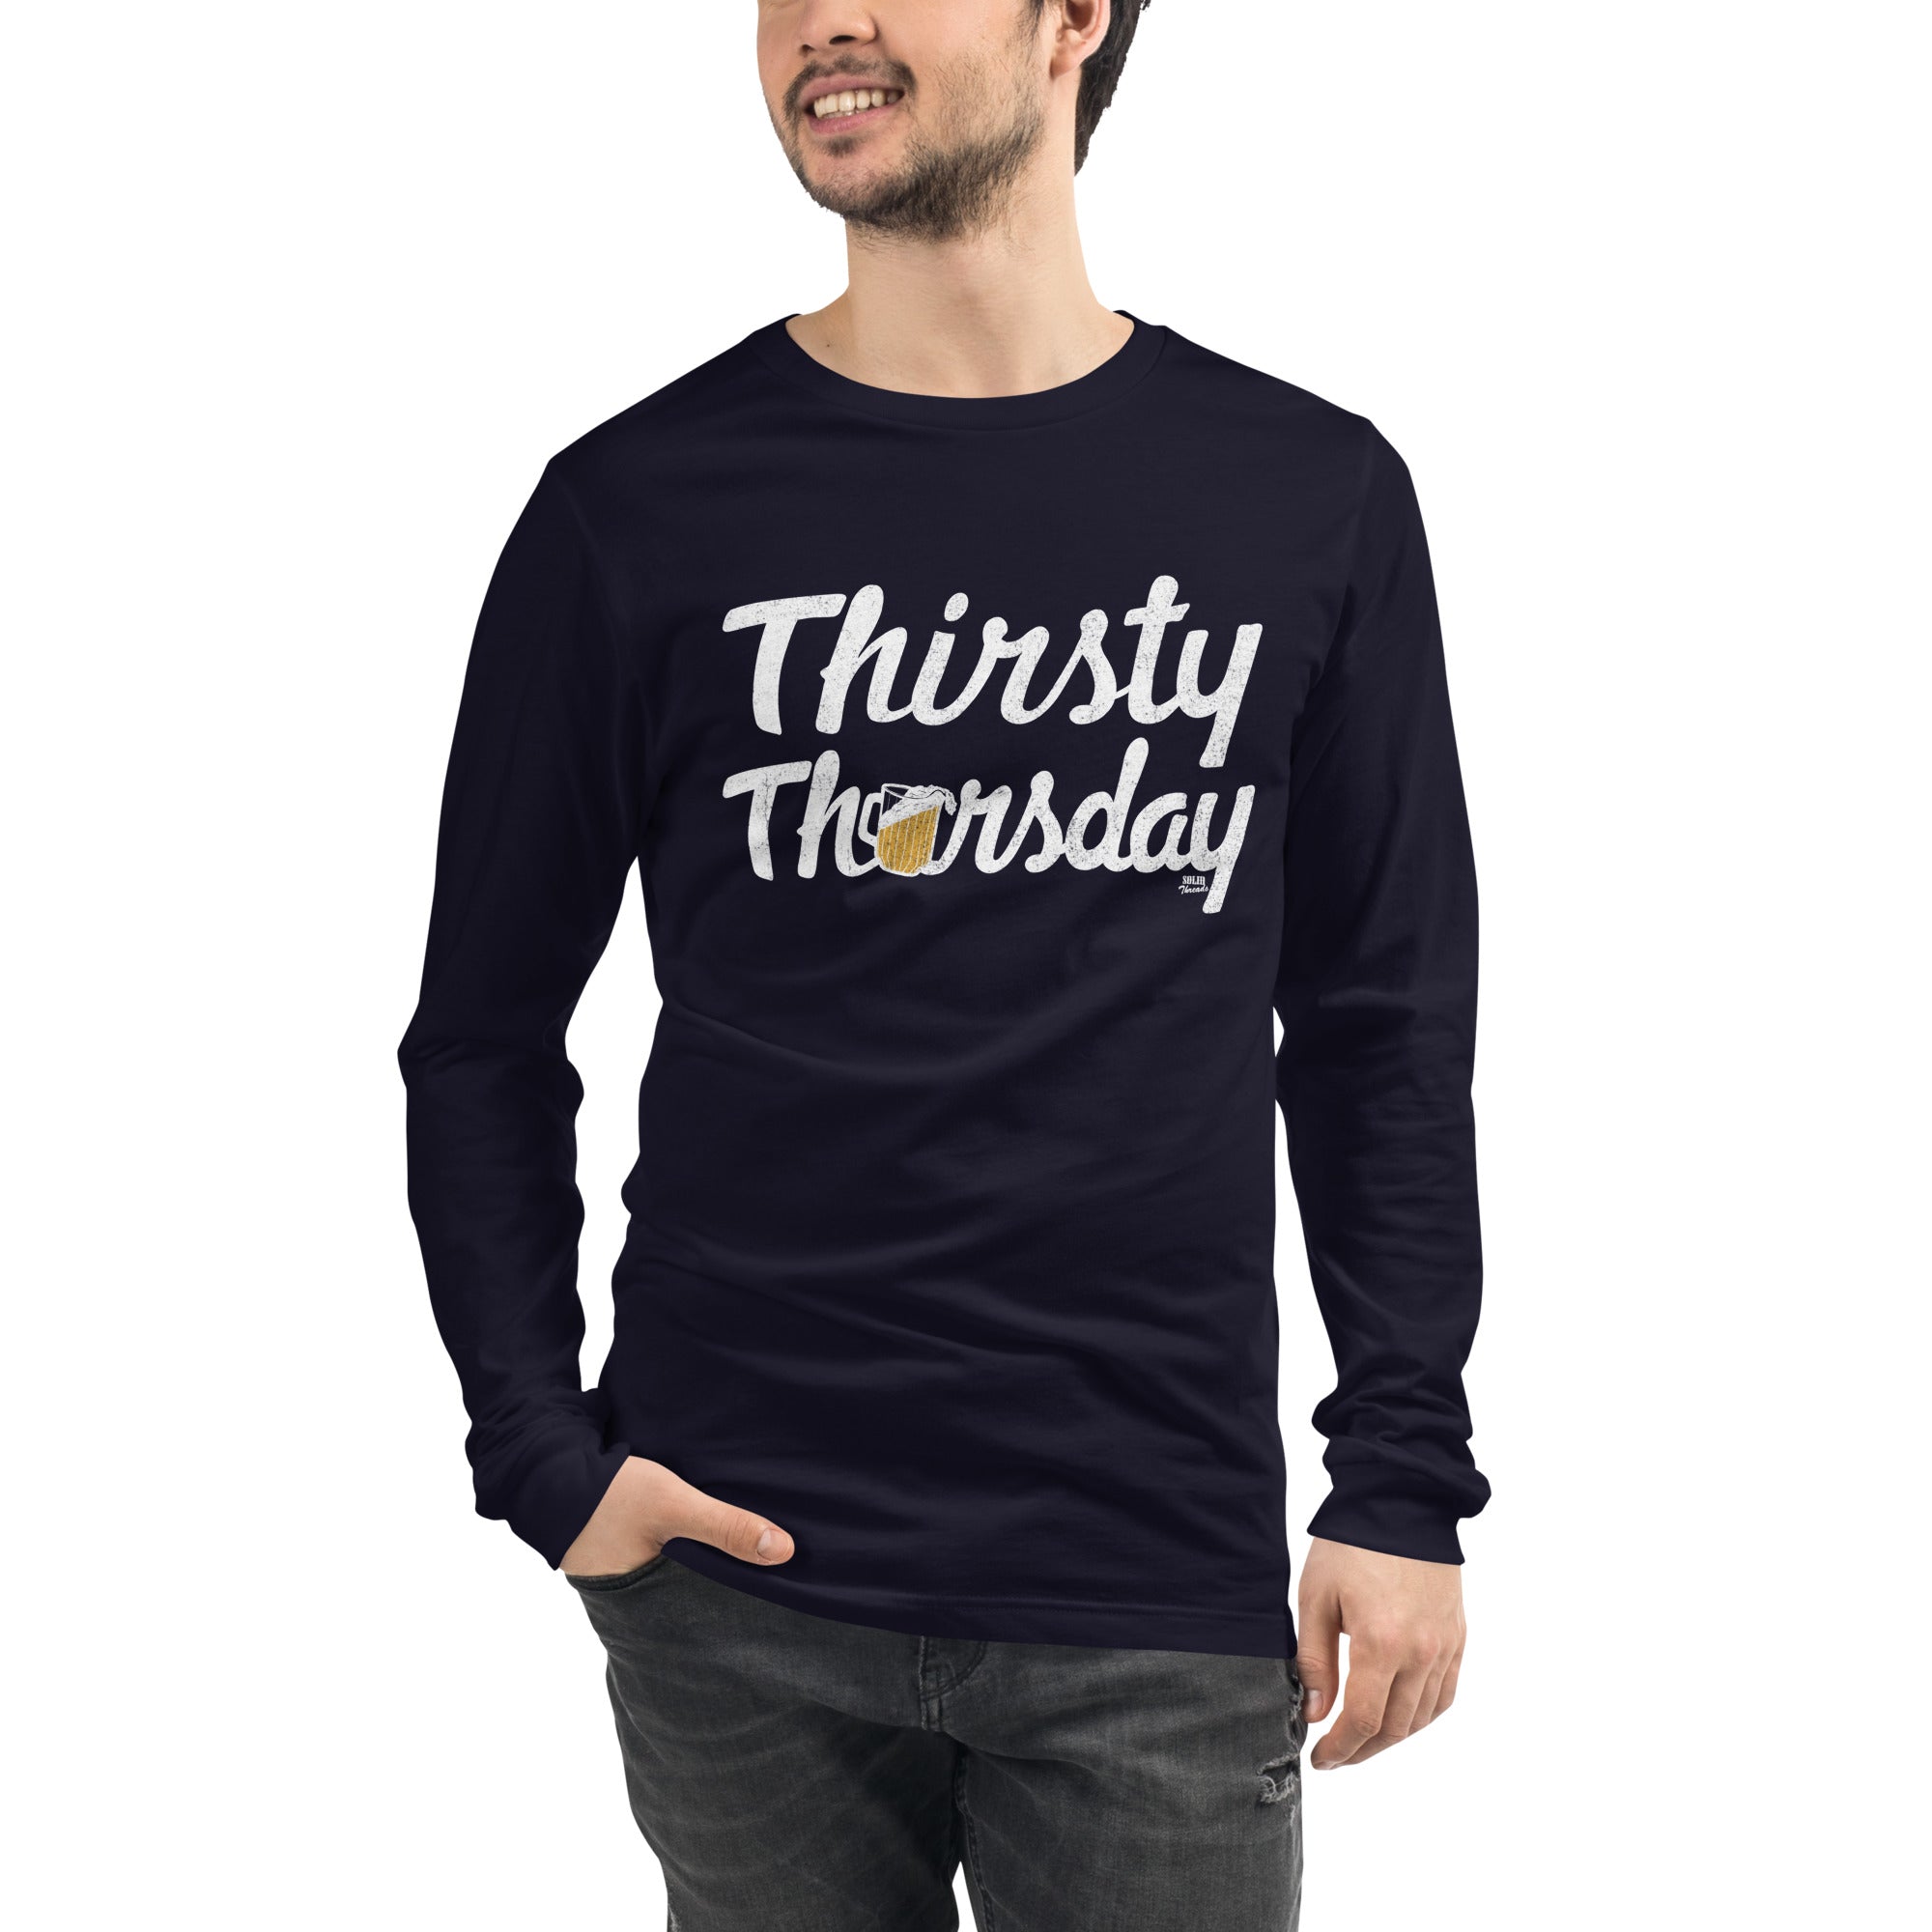 Men's Thirsty Thursday Vintage Long Sleeve T Shirt | Funny Drinking Graphic Tee | Solid Threads